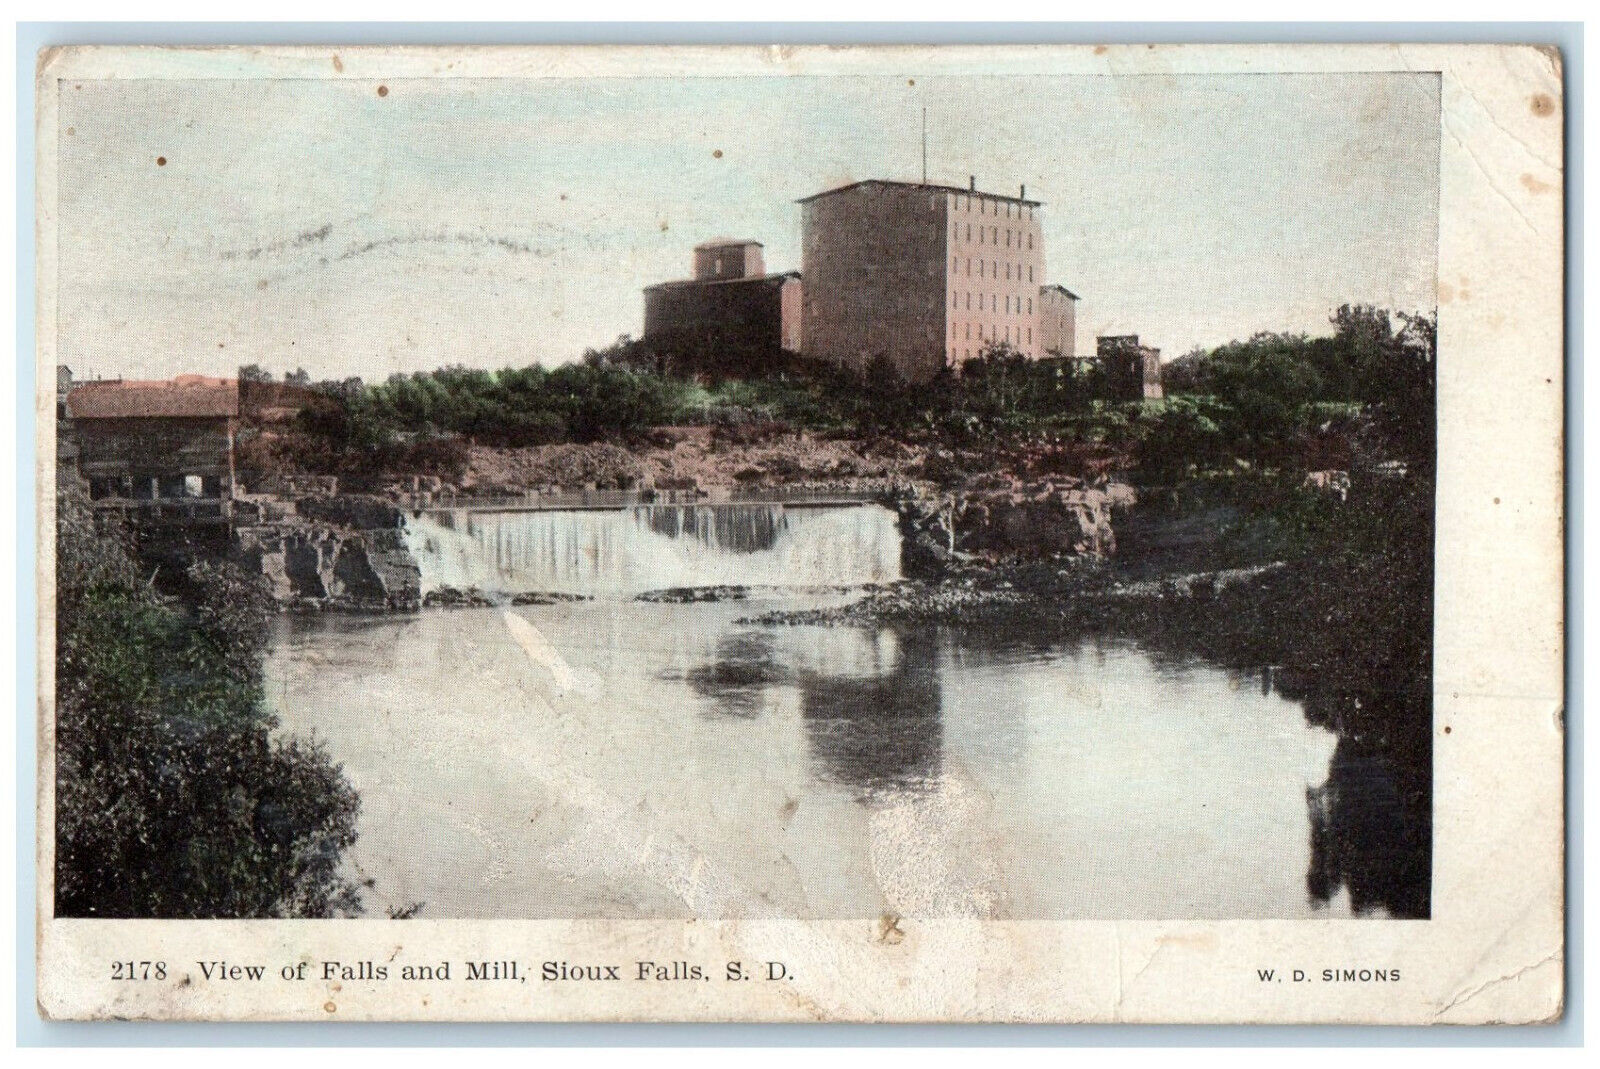 1908 View of Falls and Mill Sioux Falls South Dakota SD Antique Postcard